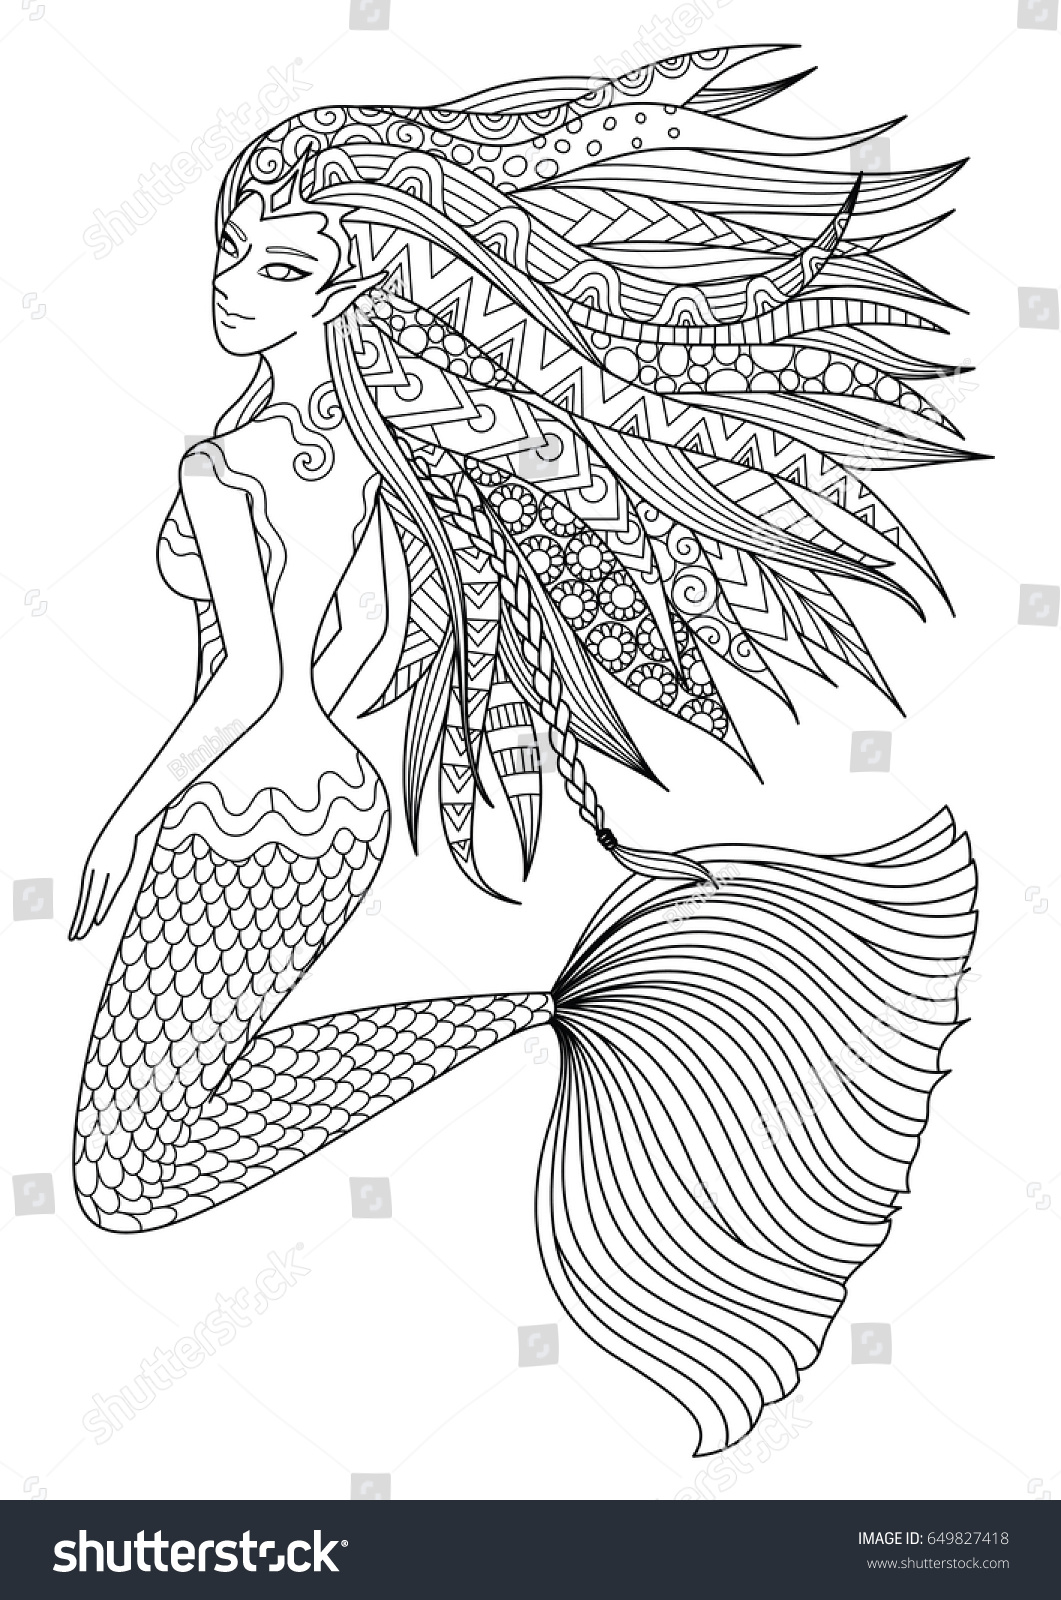 Beautiful mermaid swimming in the ocean design for adult coloring book page Vector illustration